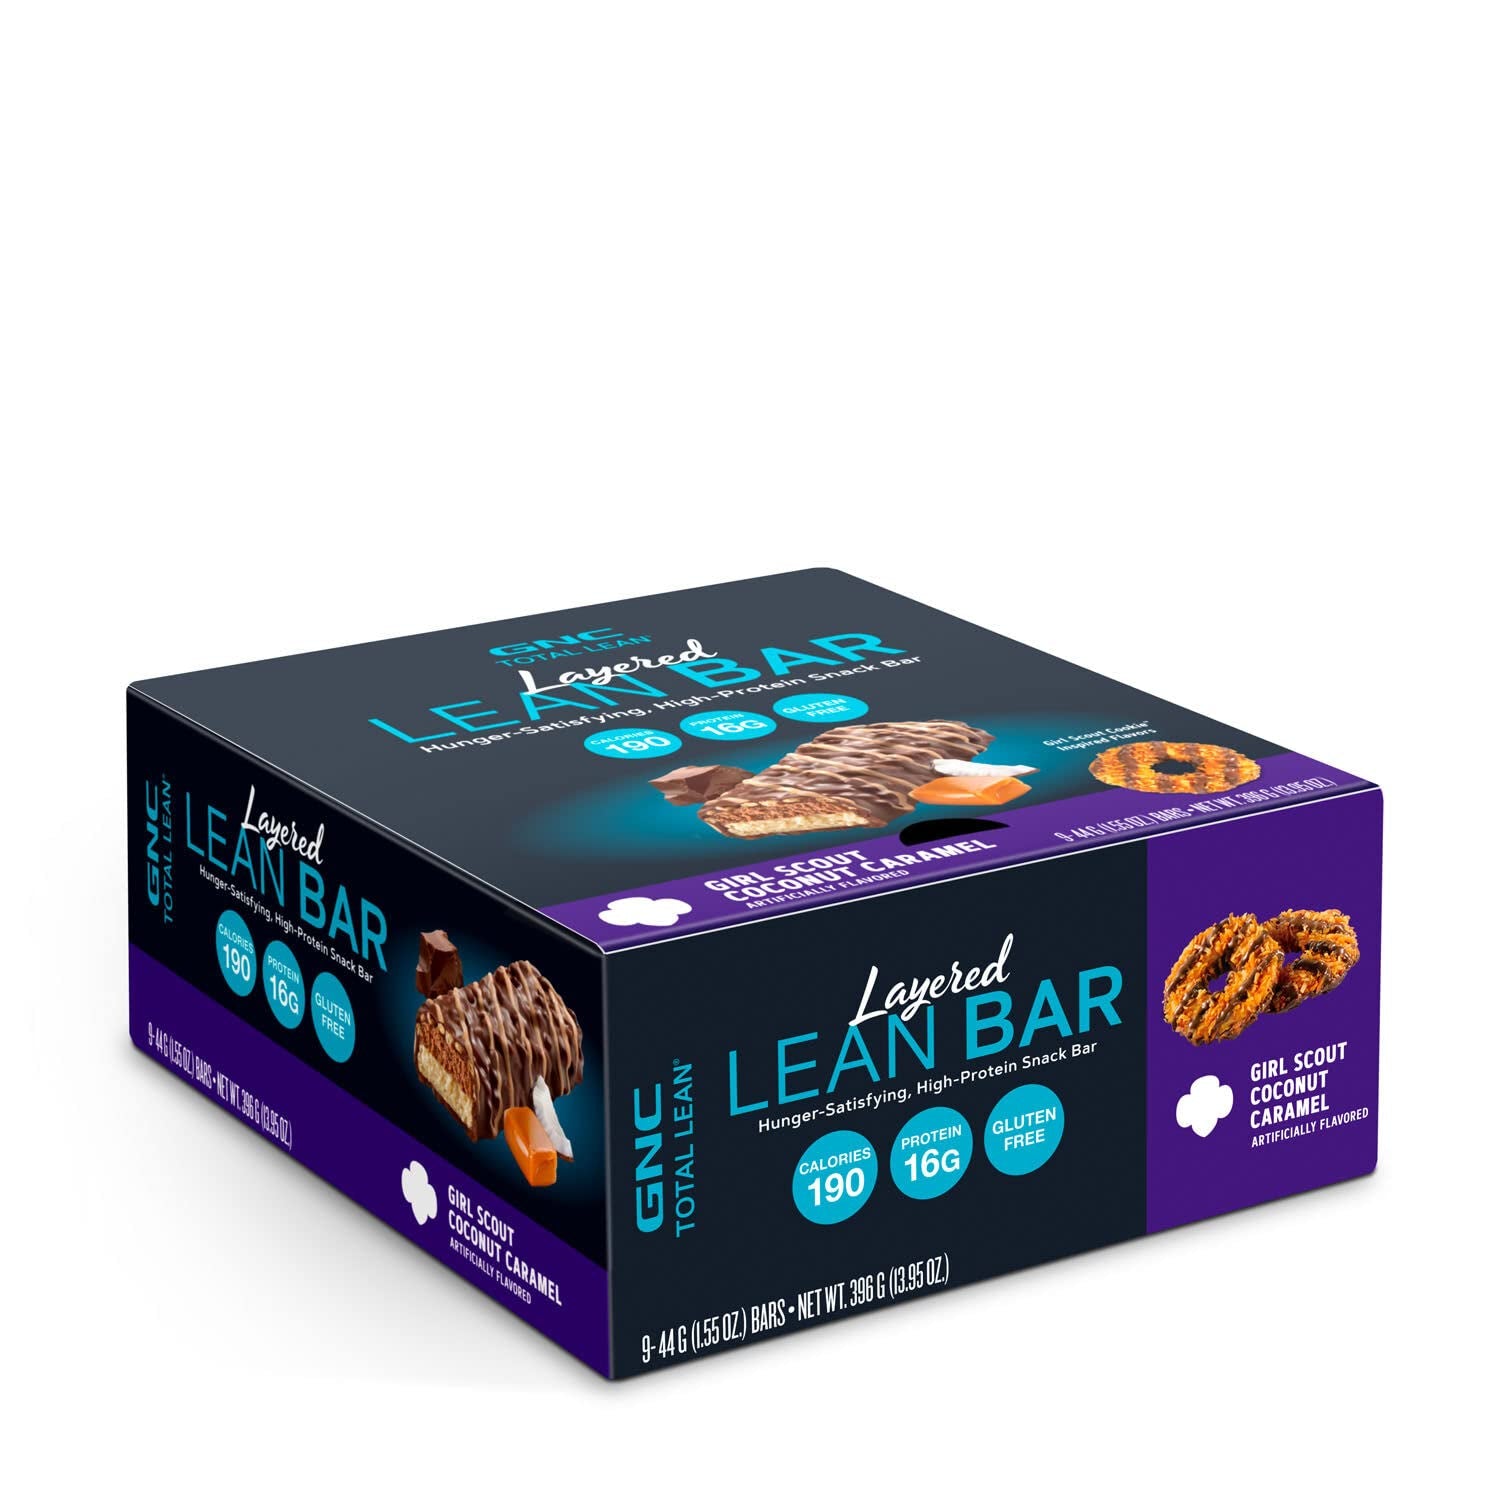 GNC Total Lean Layered Lean Bar | Hunger Satisfying - High Protein Snack Bar | Girl Scout Coconut Caramel - 9 Bars